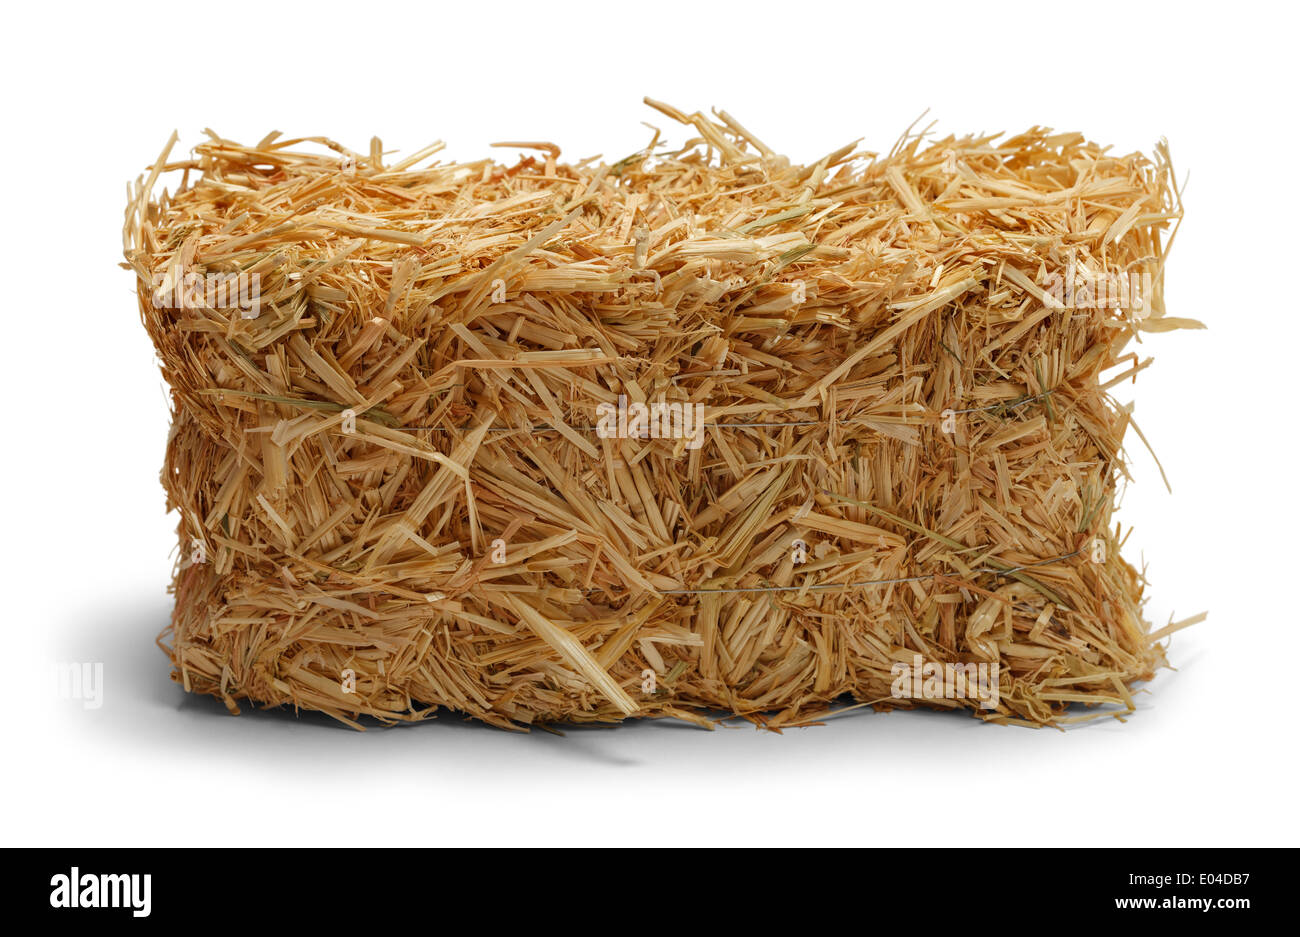 Hay Bale Side View Isolated on White Background Stock Photo - Alamy